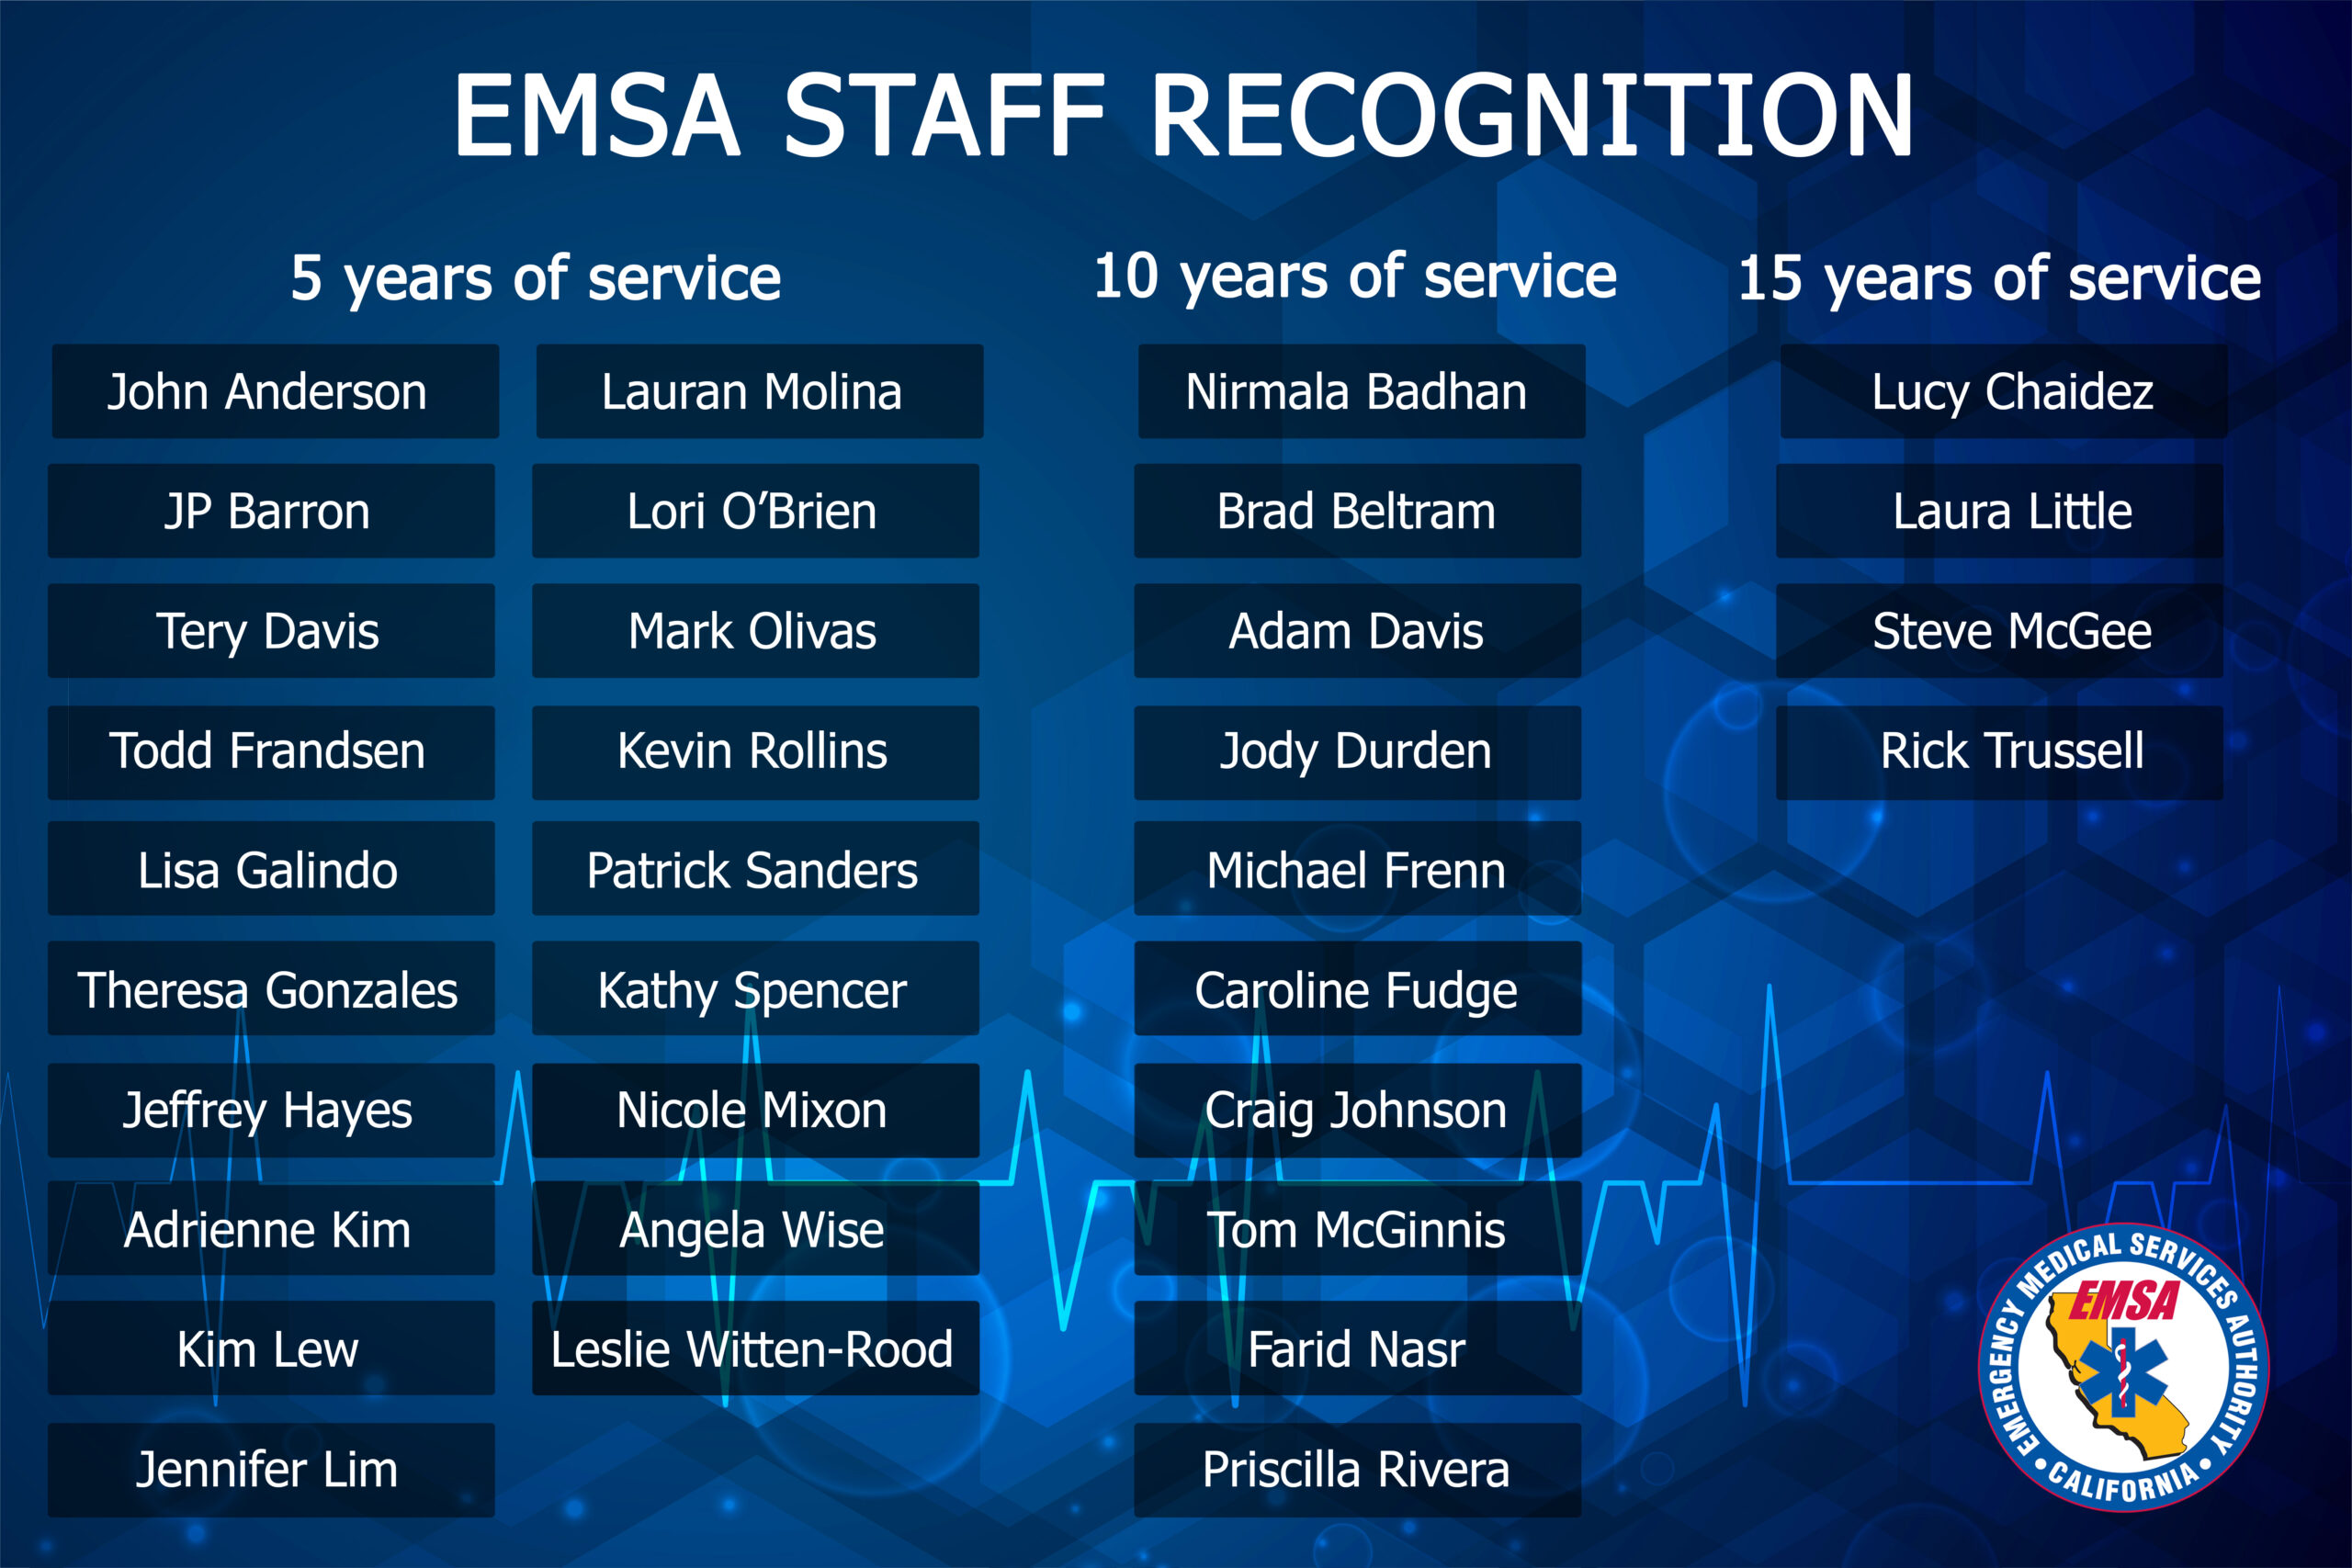 Image of a virtual plaque with the names of EMSA employees who have reach 5, 10, and 15 years of service milestones